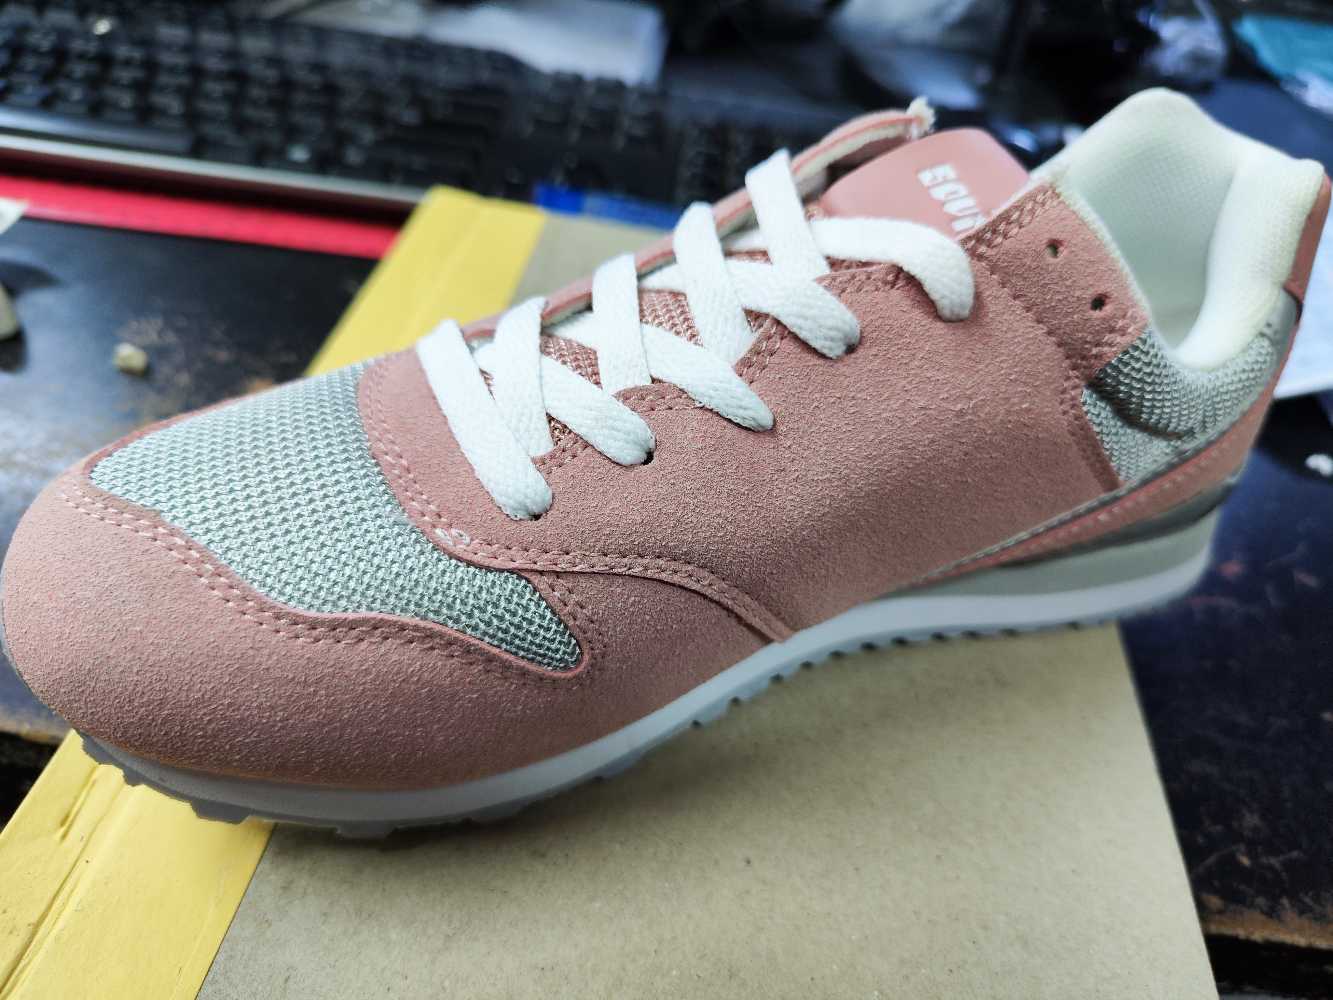 Sneakers - SOVIET TESSA BLUSH PINK SNEAKERS RETAIL R600 was sold for ...